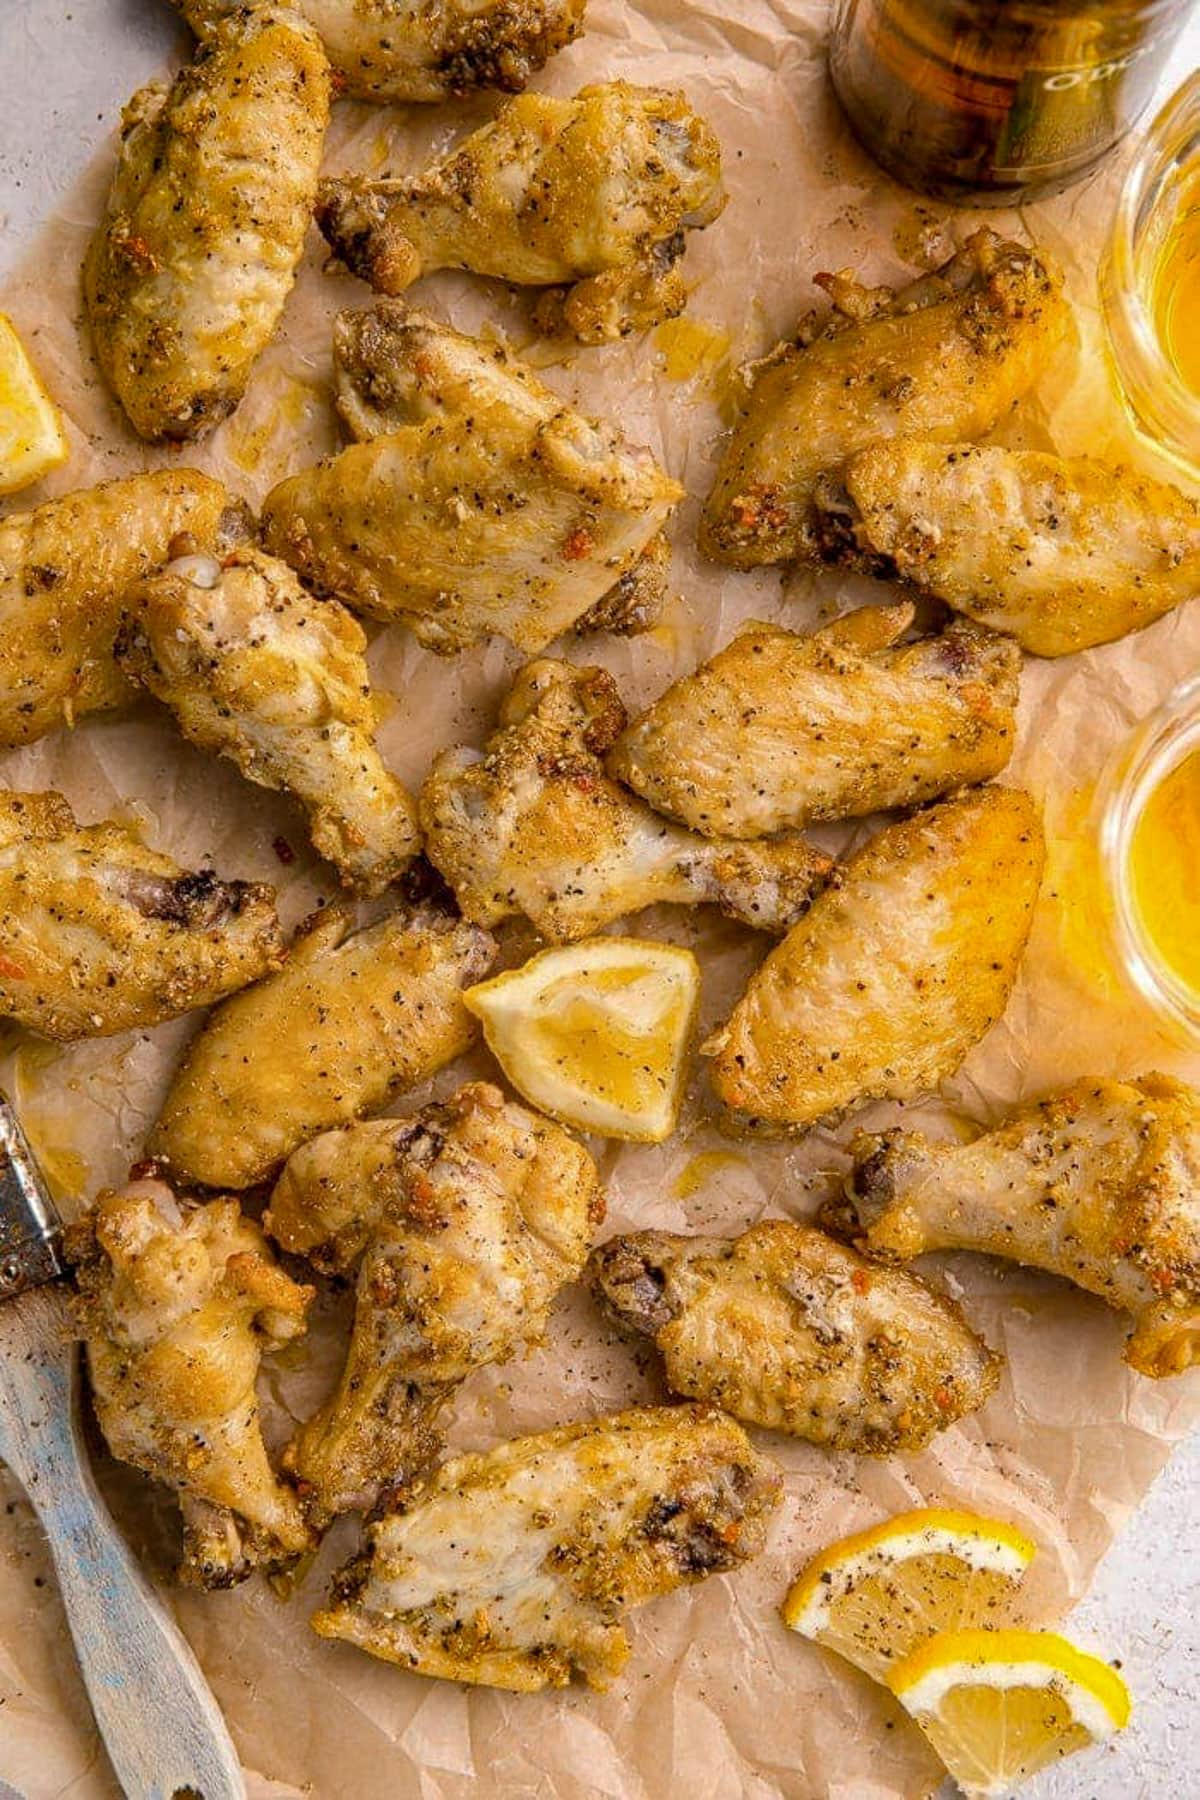 Lemon pepper seasoned chicken wings on a baking sheet lined with parchment paper.